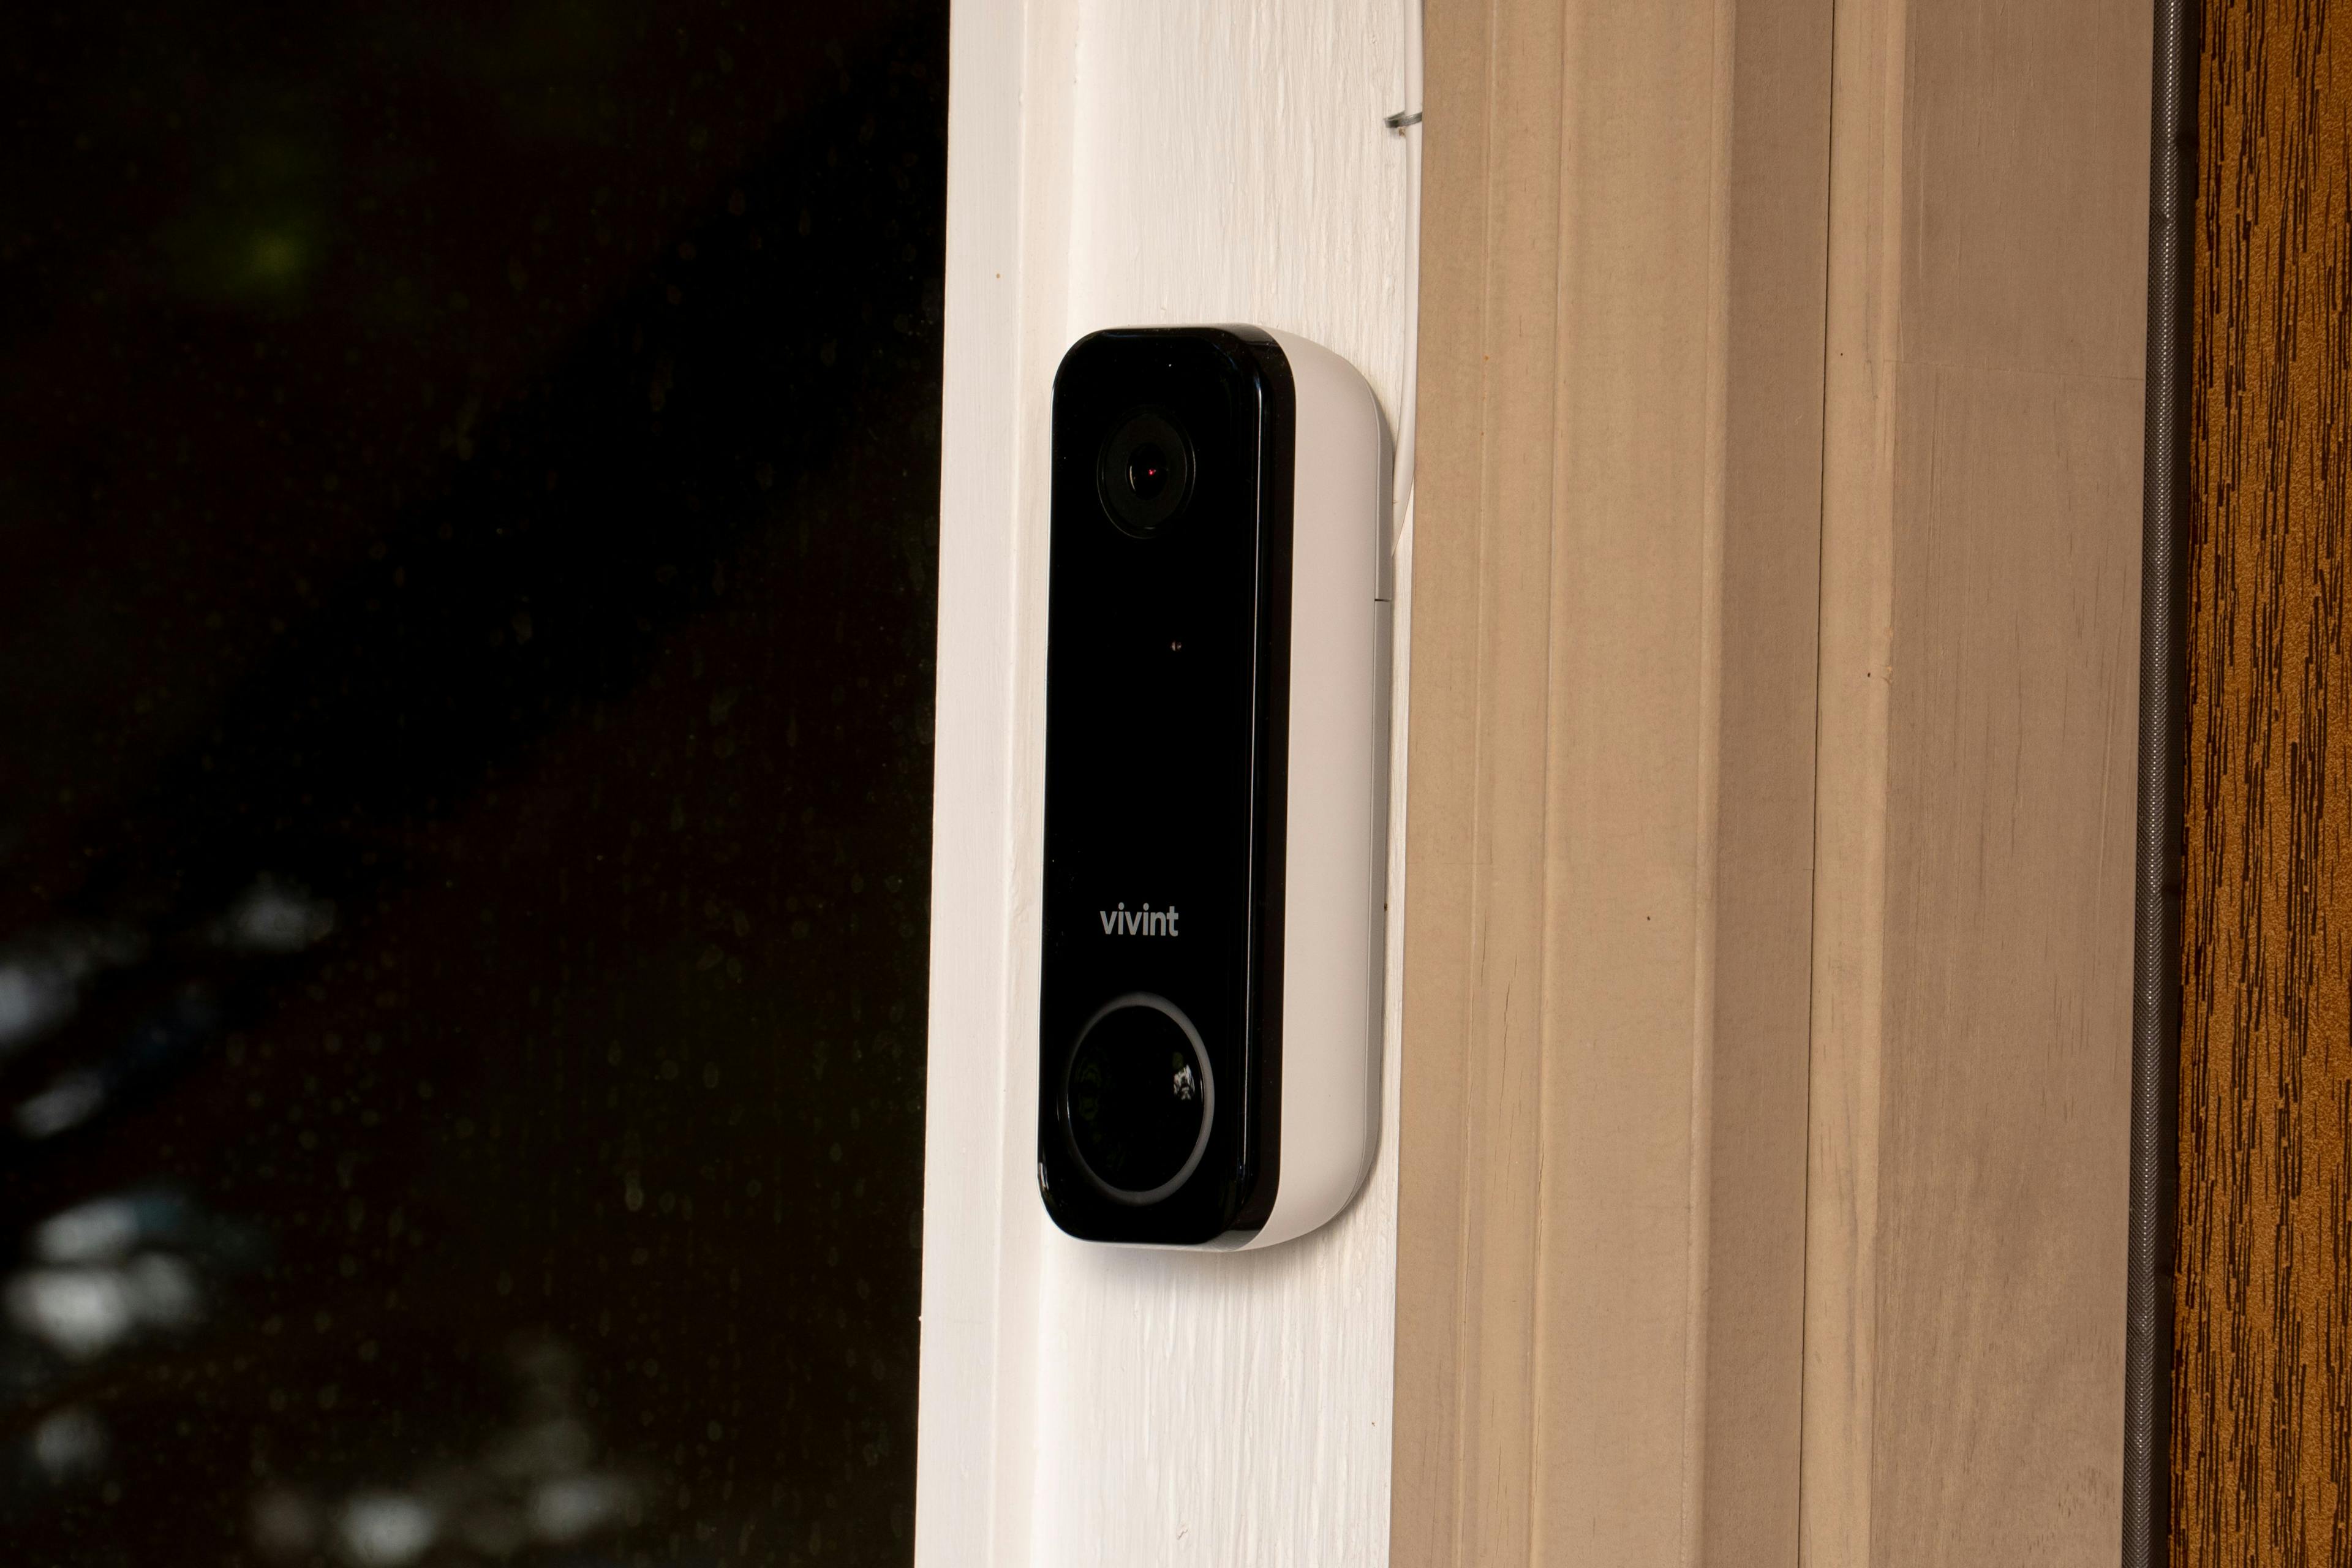 Vivint video doorbell attached to outside doorframe